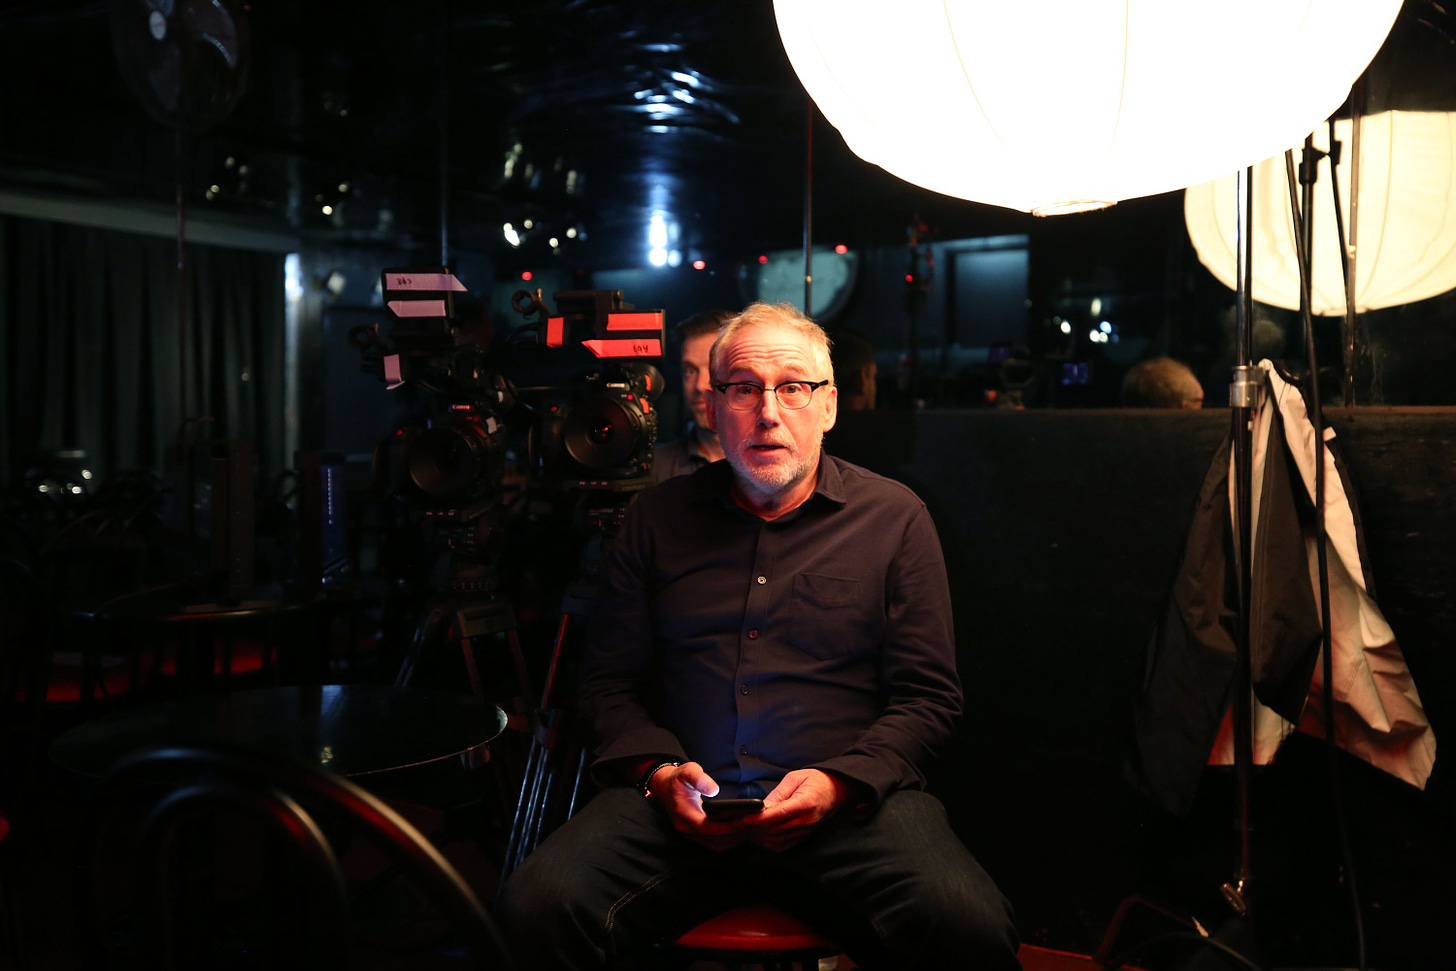 Interview: Mike Binder on His Comedy Store Documentary